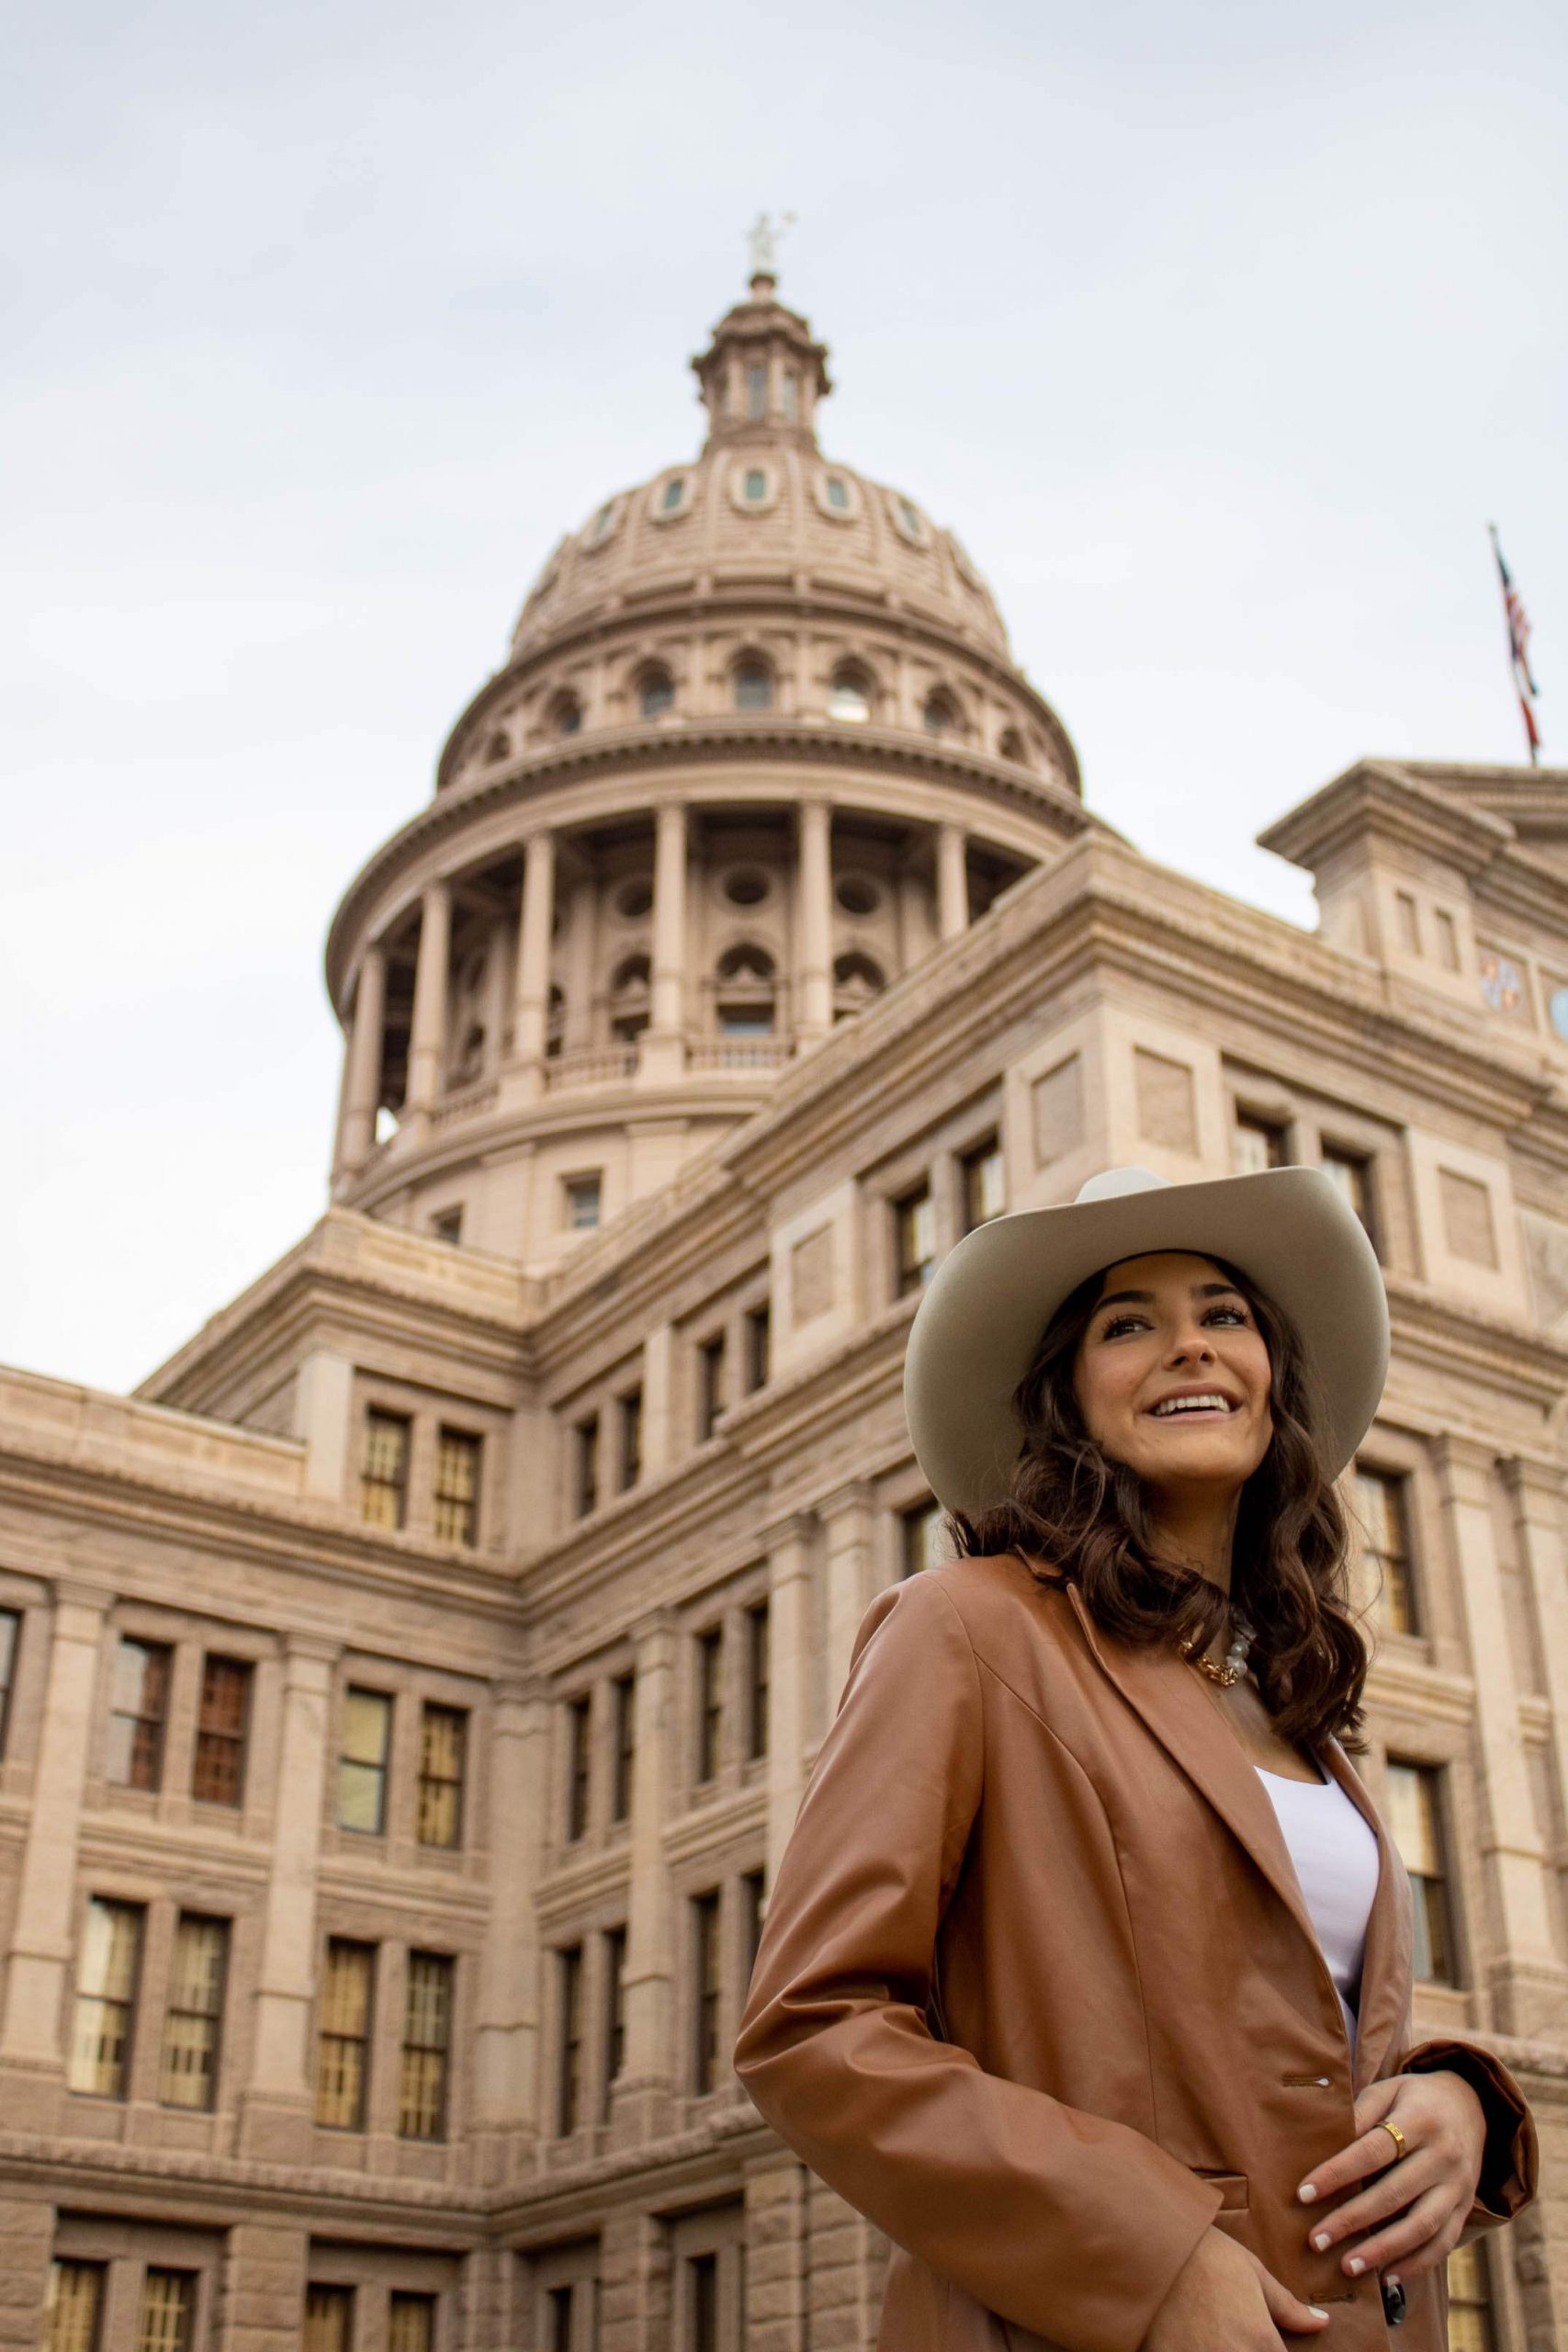 College girl in a cowboy hat smiling in front of the Texas Capitol building